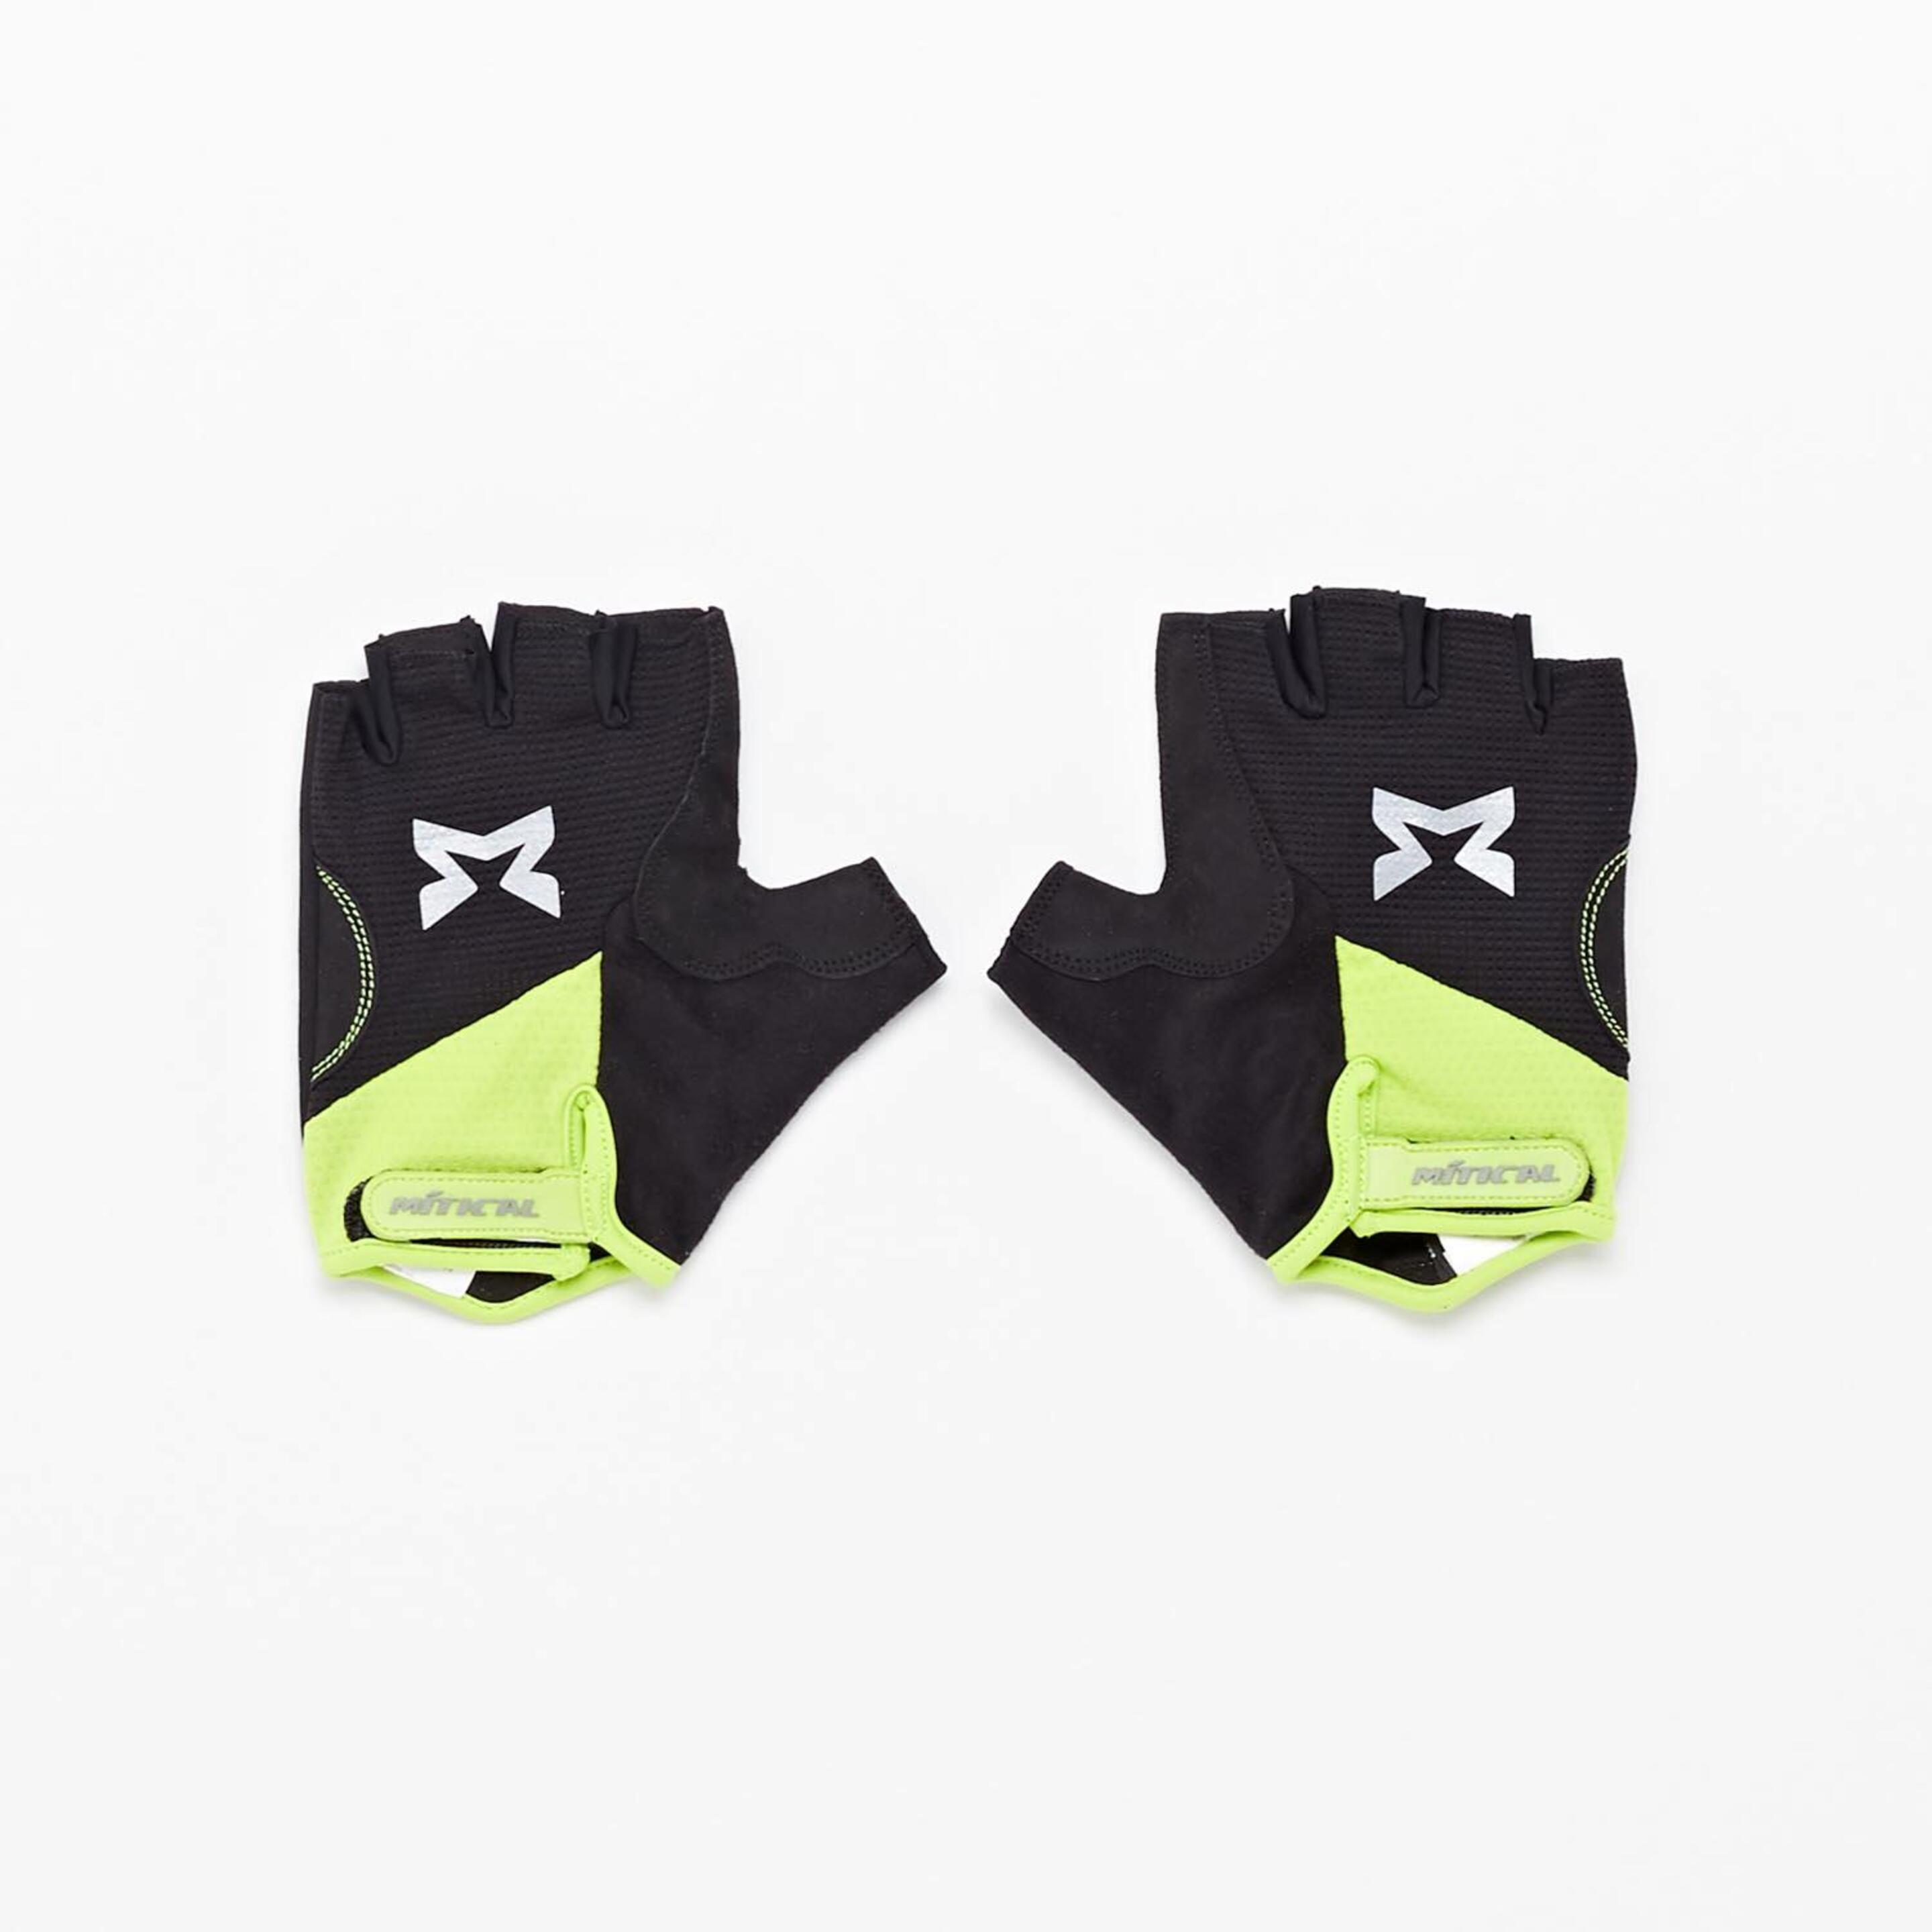 Mítical Speed - verde - Guantes Ciclismo